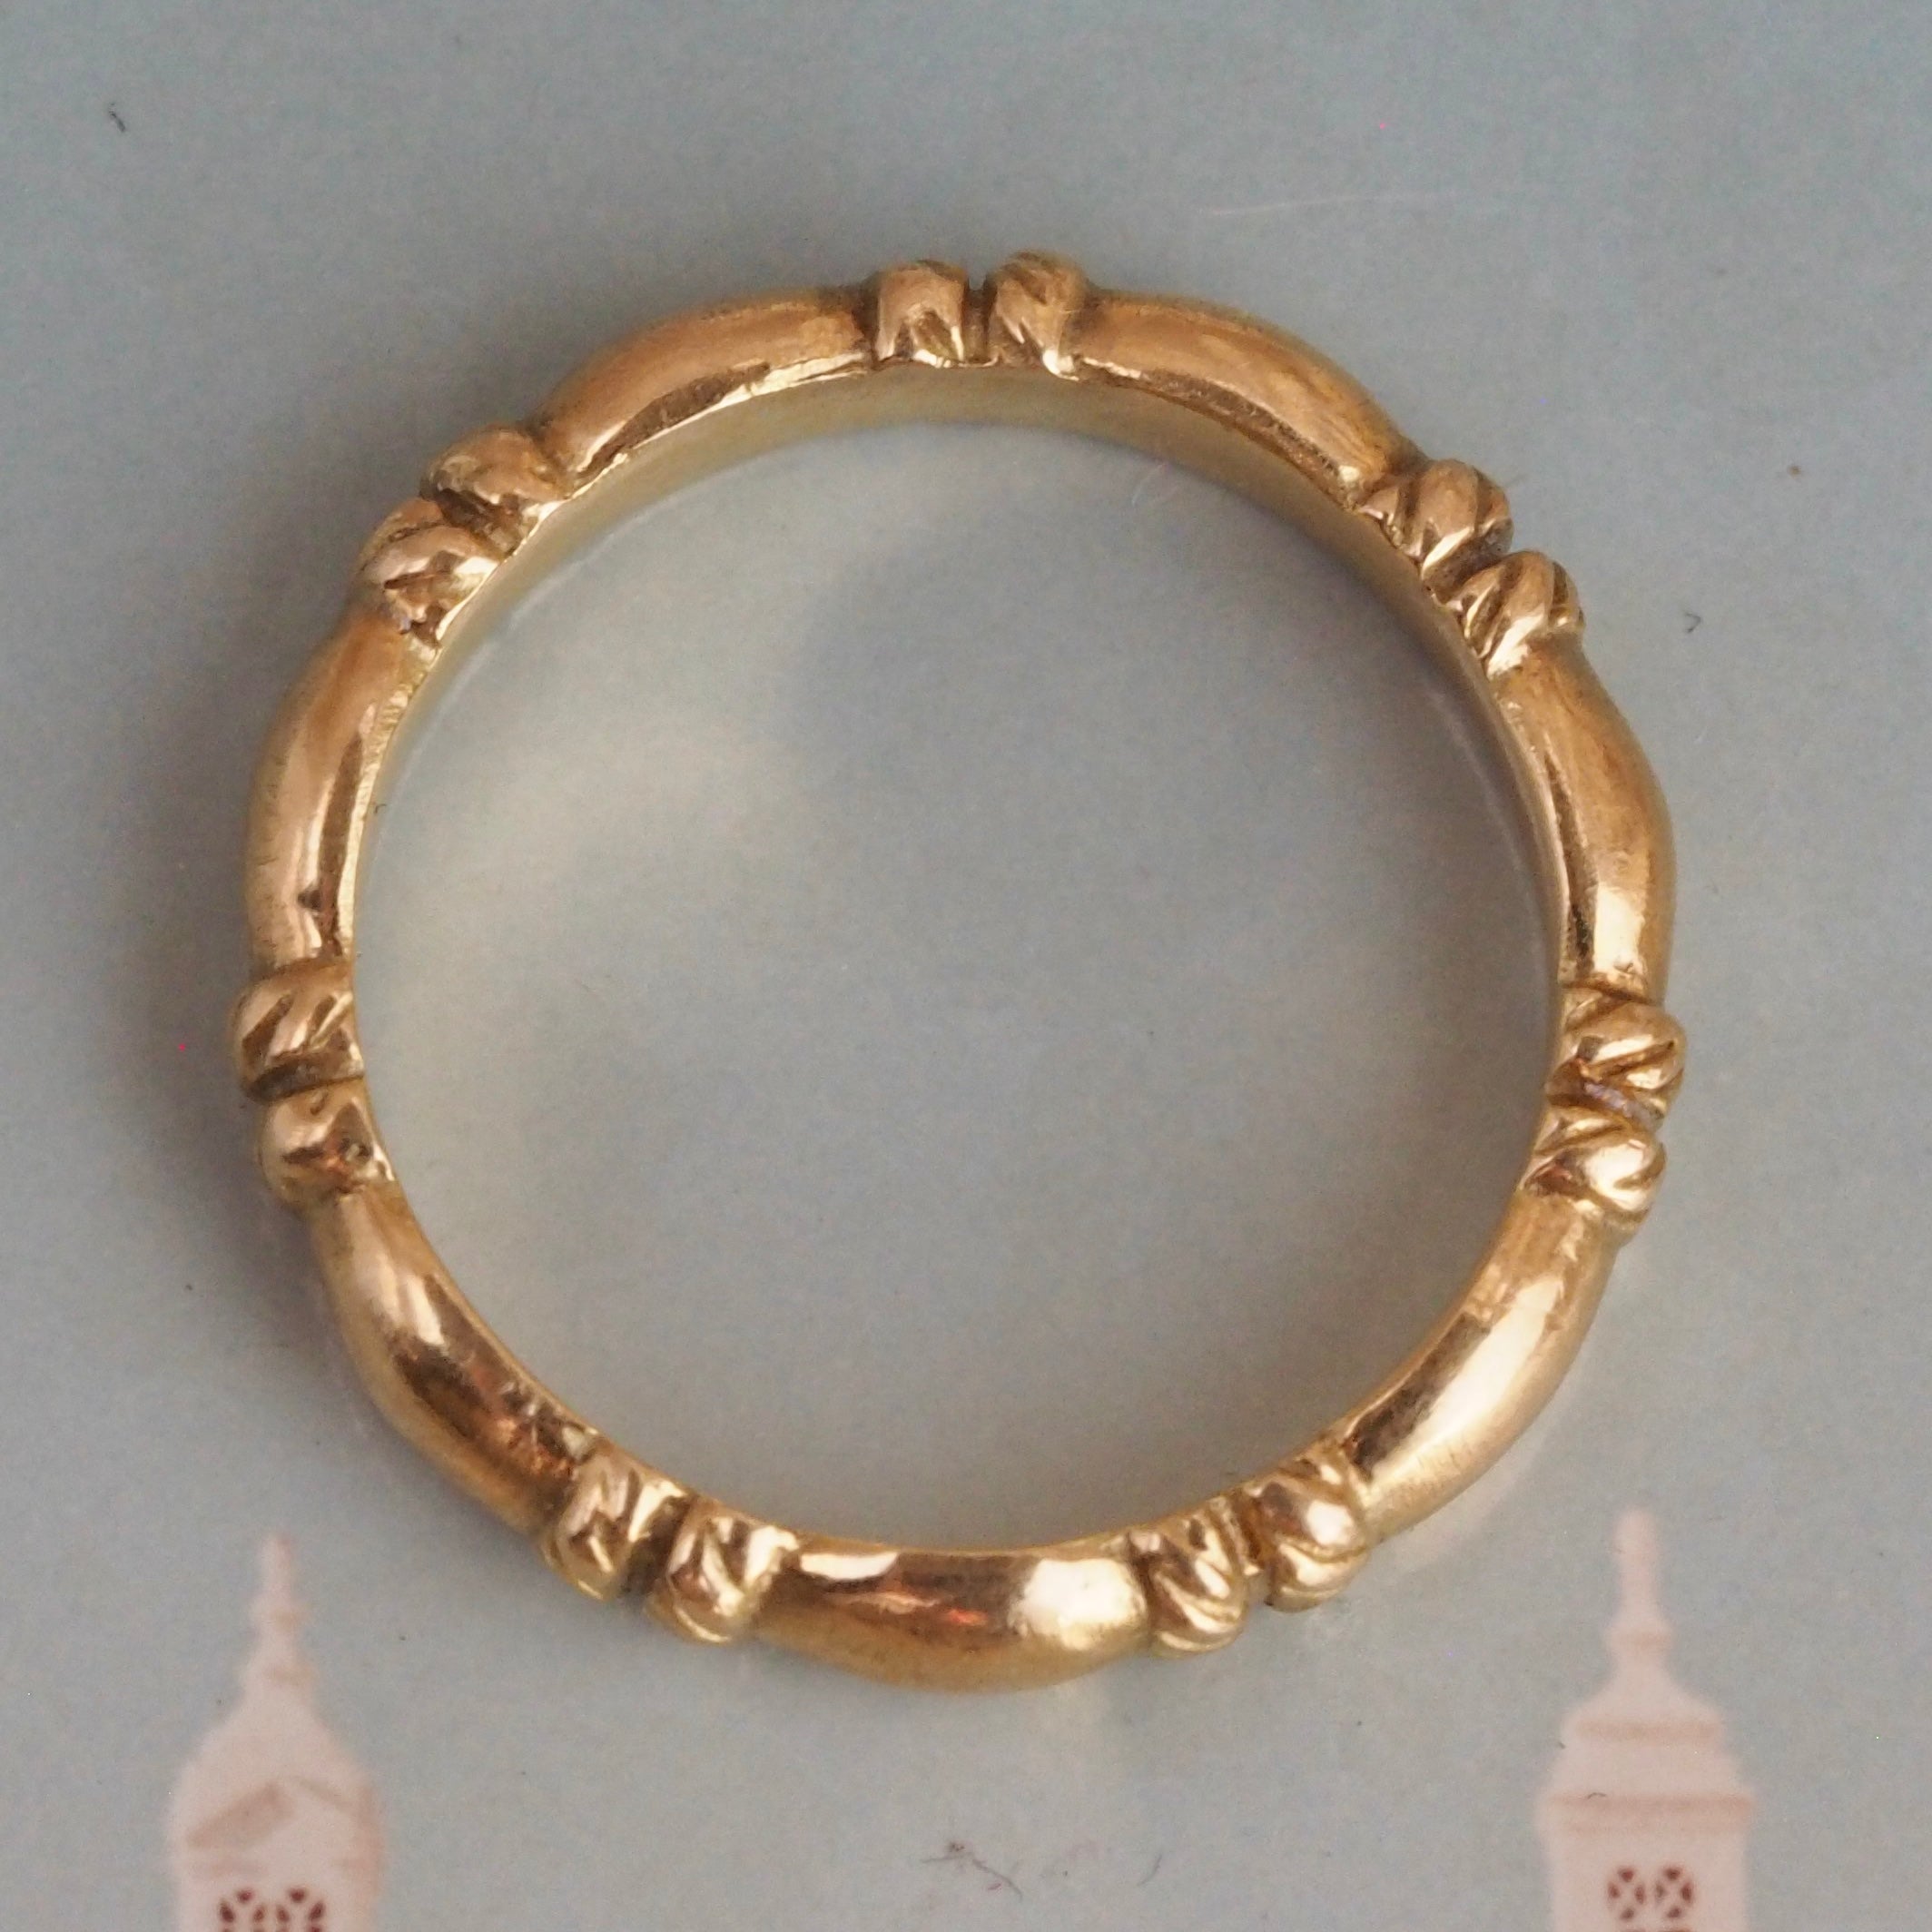 Vintage French 18k Gold Rope Band